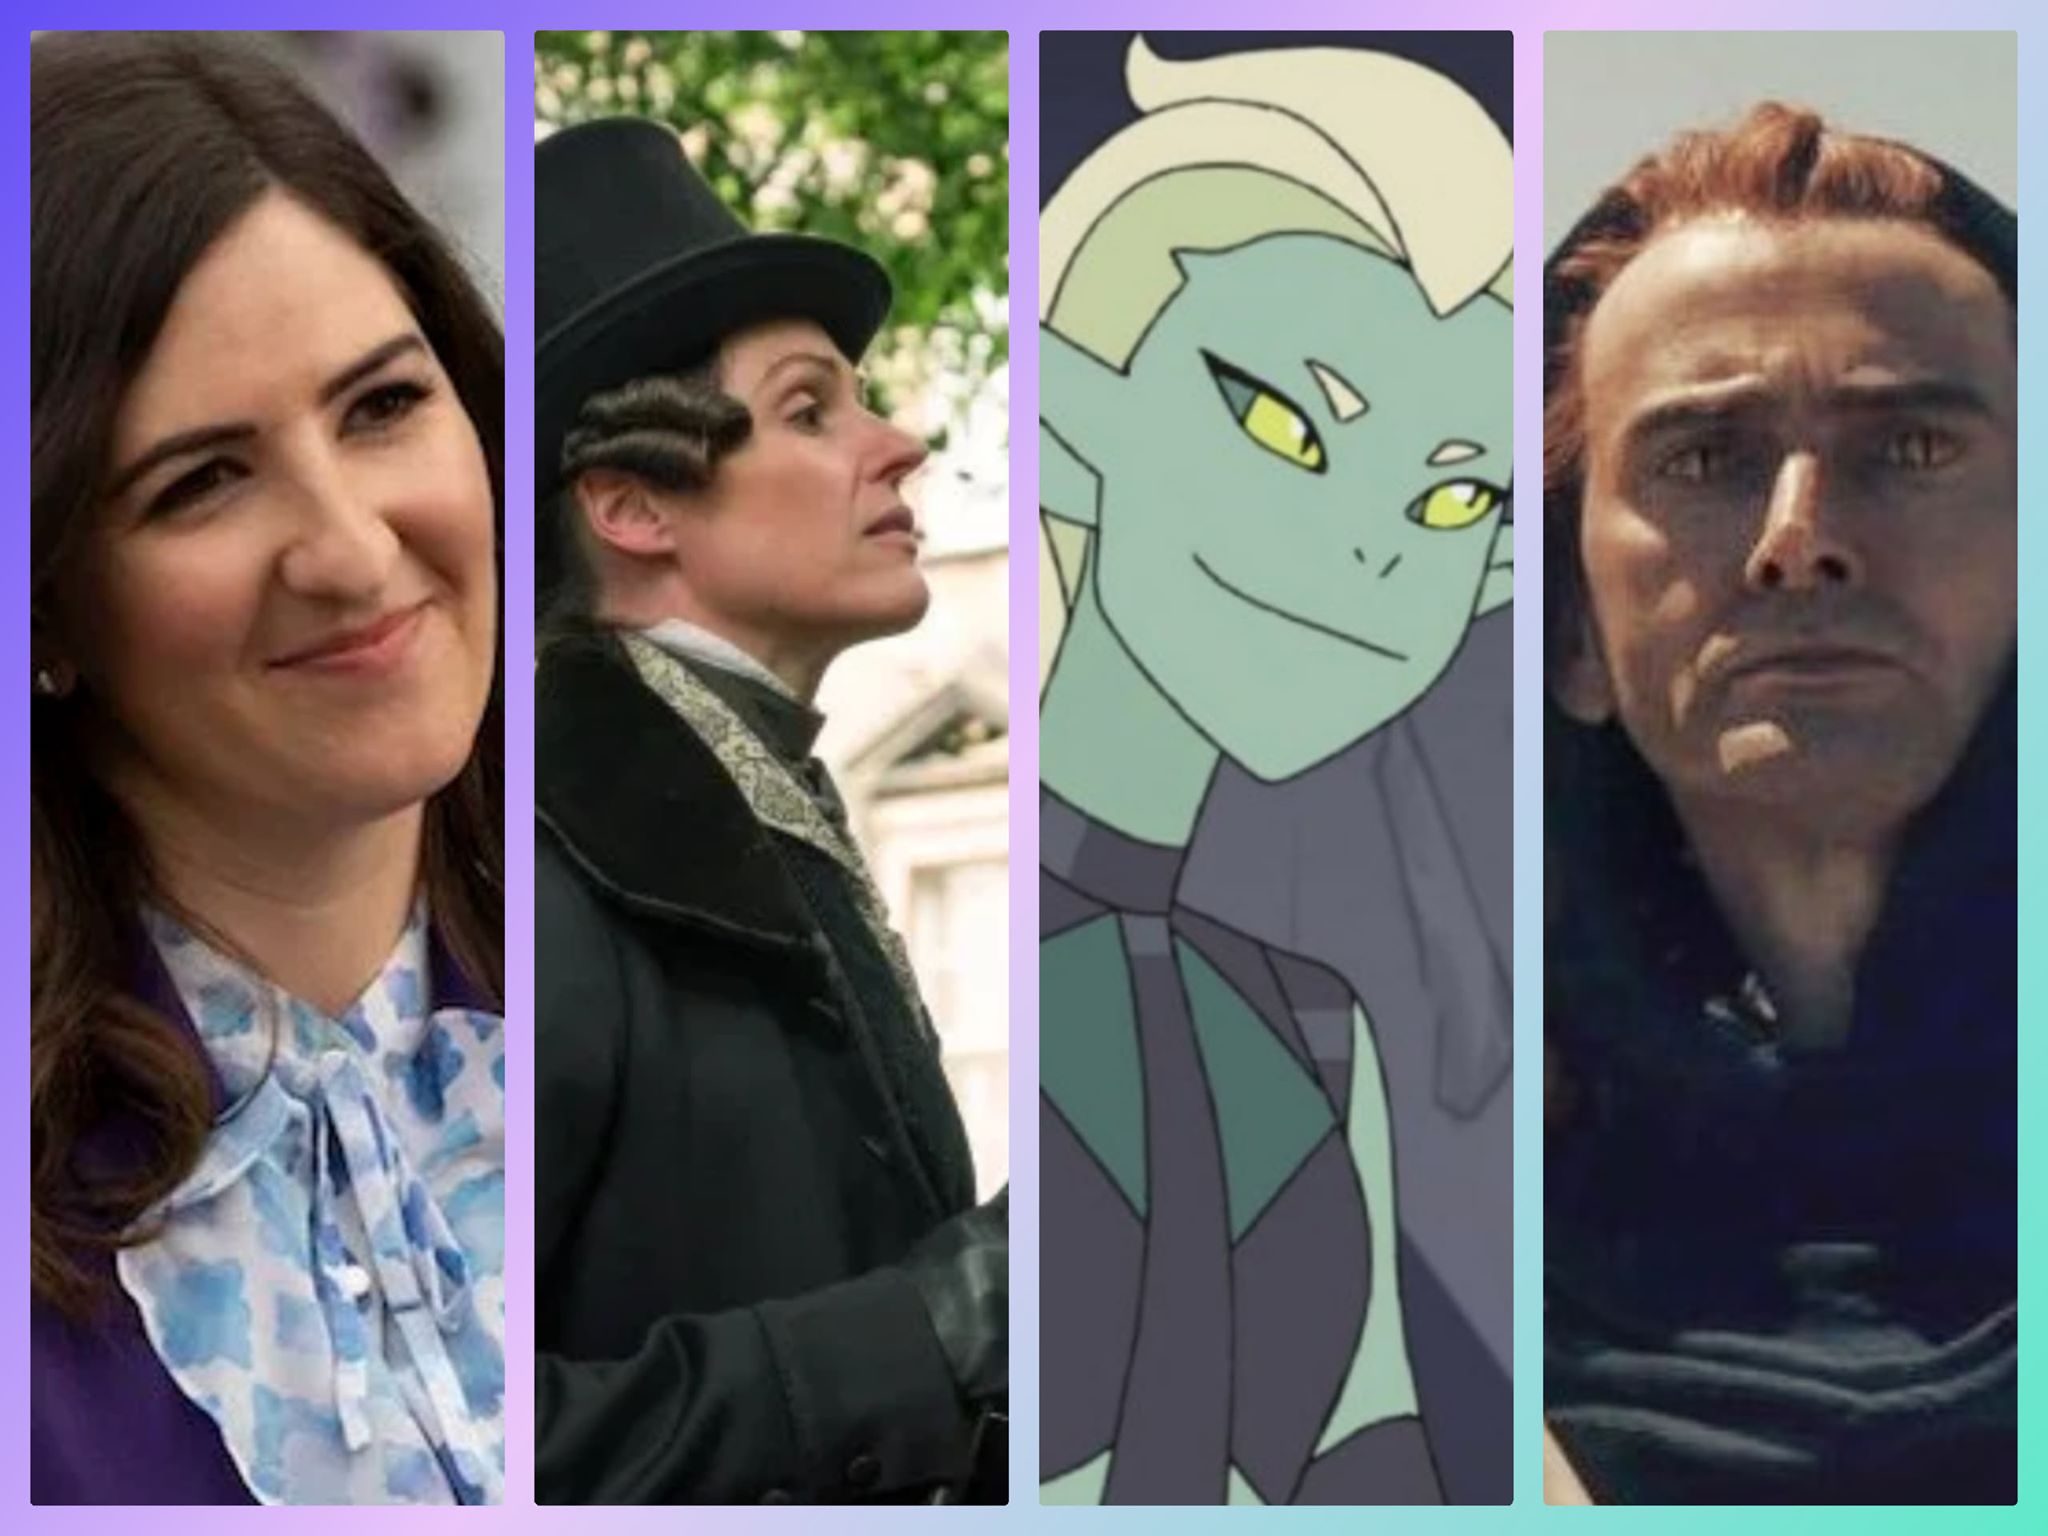 Four characters from fandom who have had to assert their identities. Janet from the Good Place, Anne Lister from Gentleman Jack, Double Trouble from She-ra, and Crowley from Good Omens